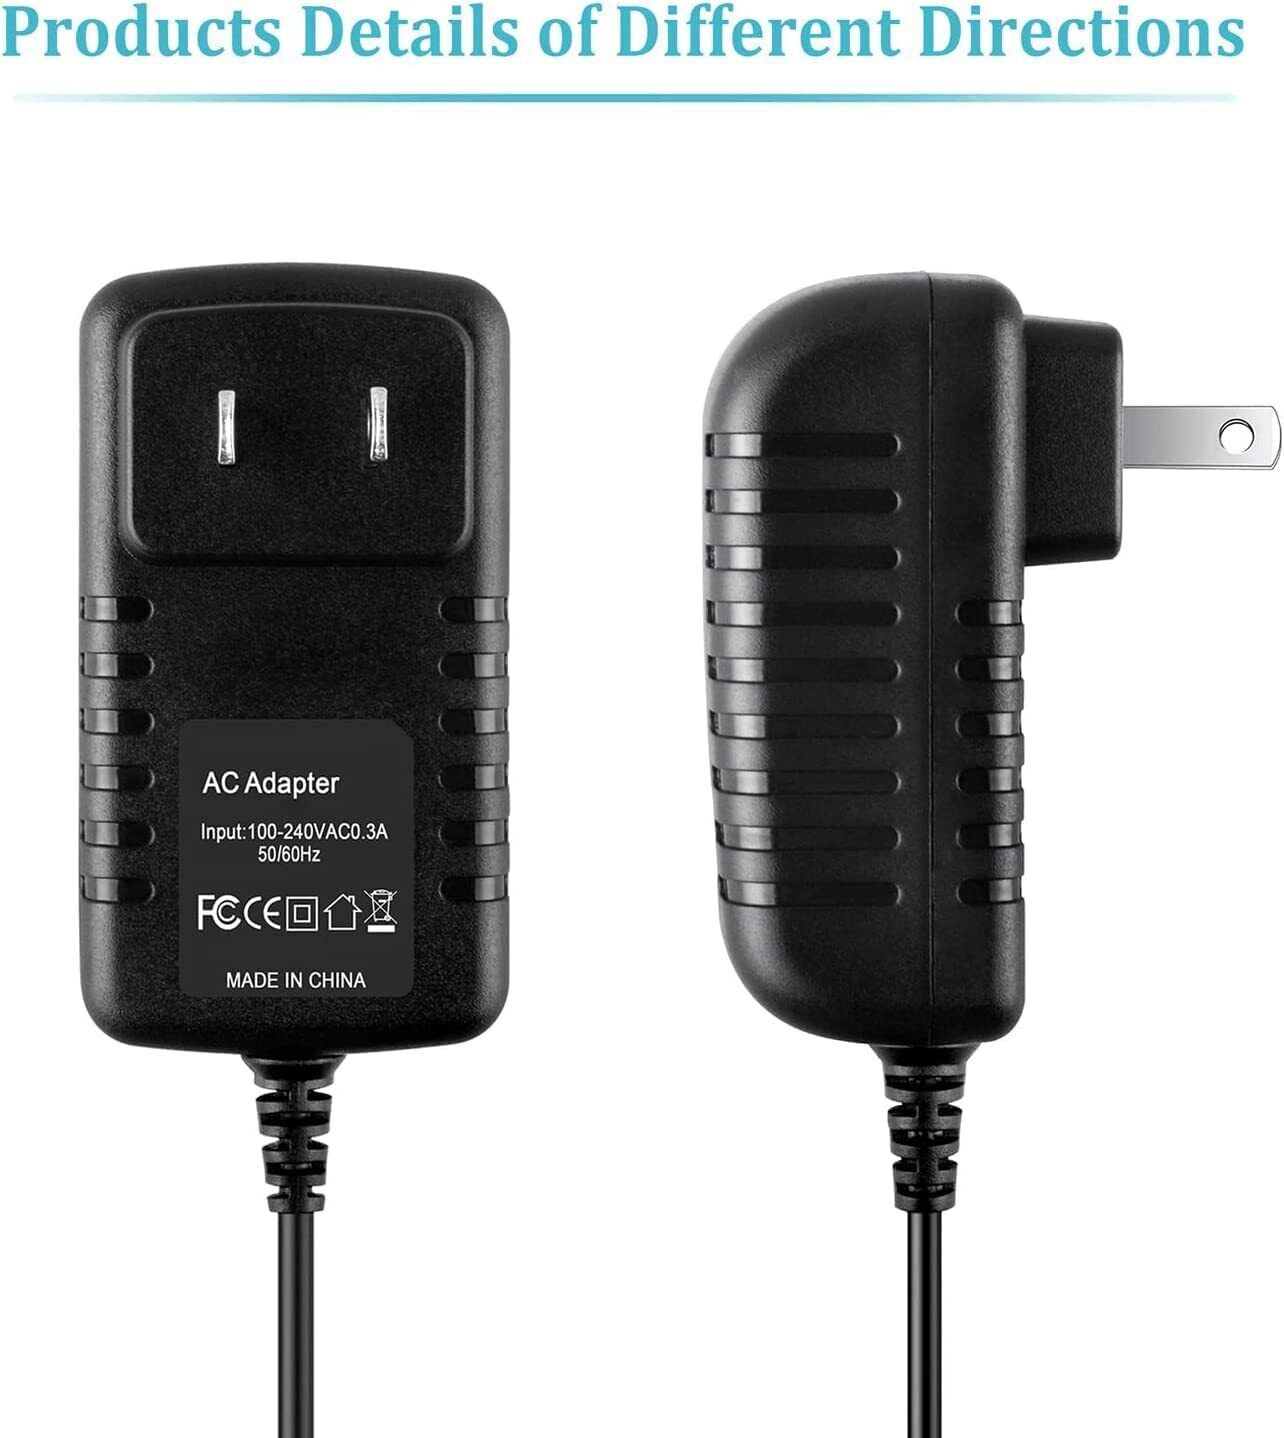 AC Adapter for Casio AD-12 AD12 AD-12U AD-12UL Keyboard Charger Power Mains Technical Specifications: Input Voltage: A